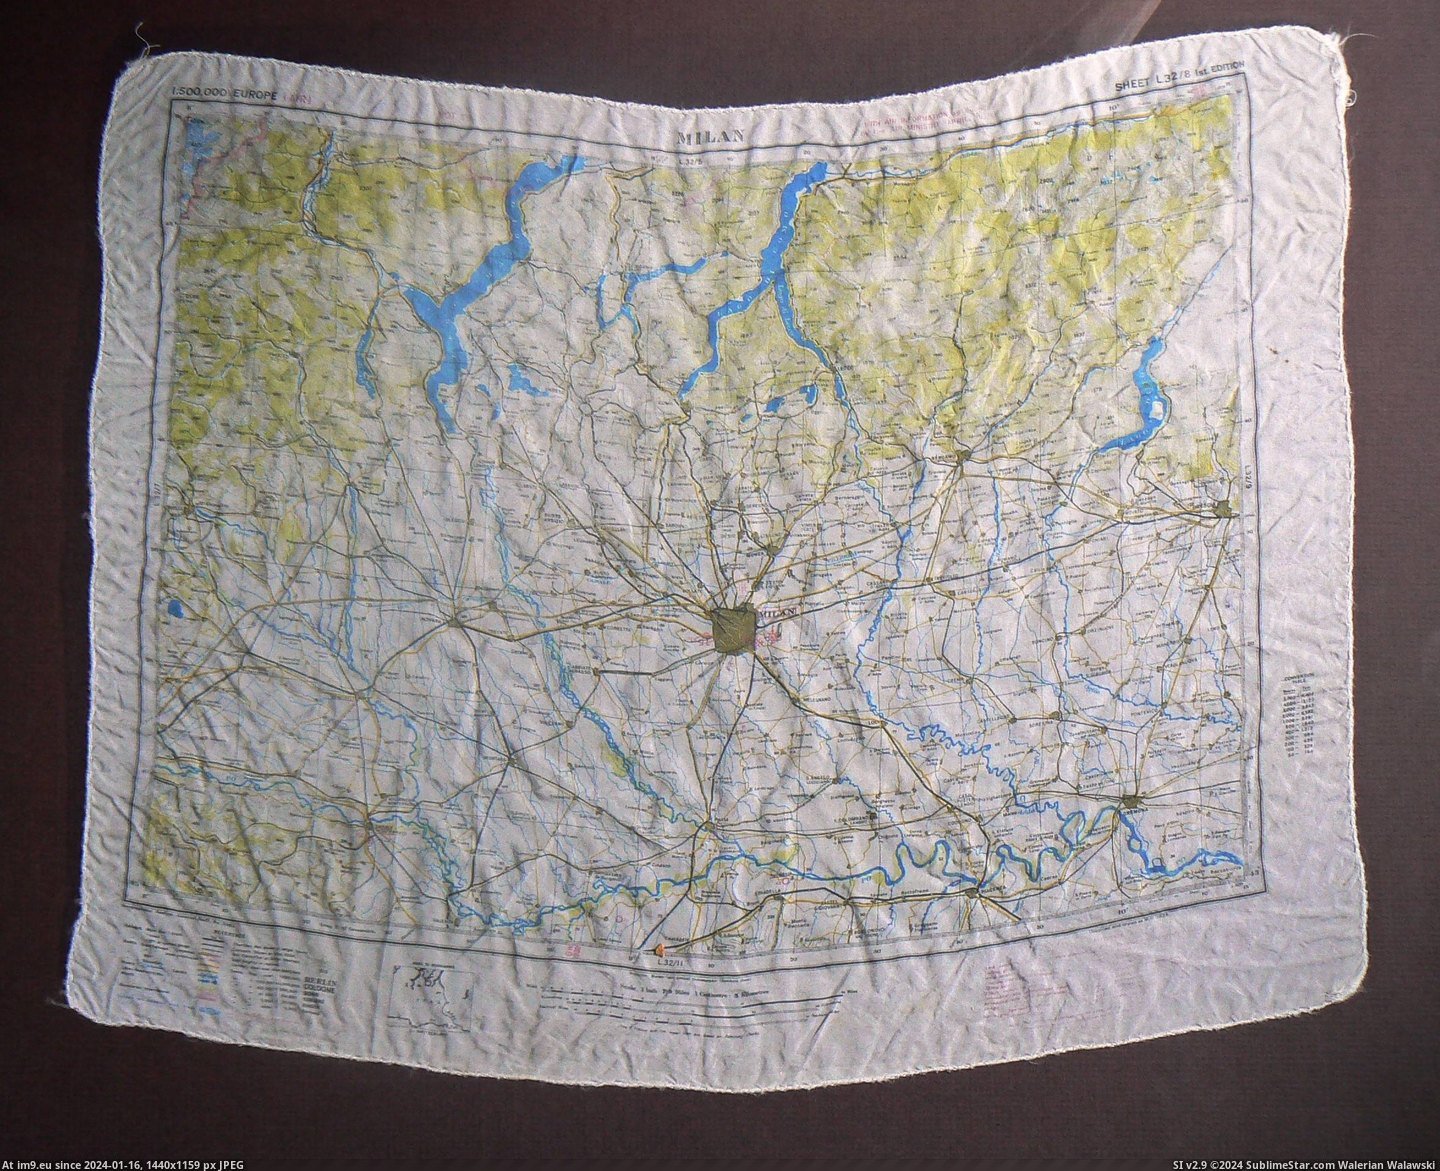 #Map #Area #Wwii #Silk #Escape #Milan [Mapporn] A WWII silk 'escape map' of the Milan area [2,355 x 1,908] Pic. (Изображение из альбом My r/MAPS favs))